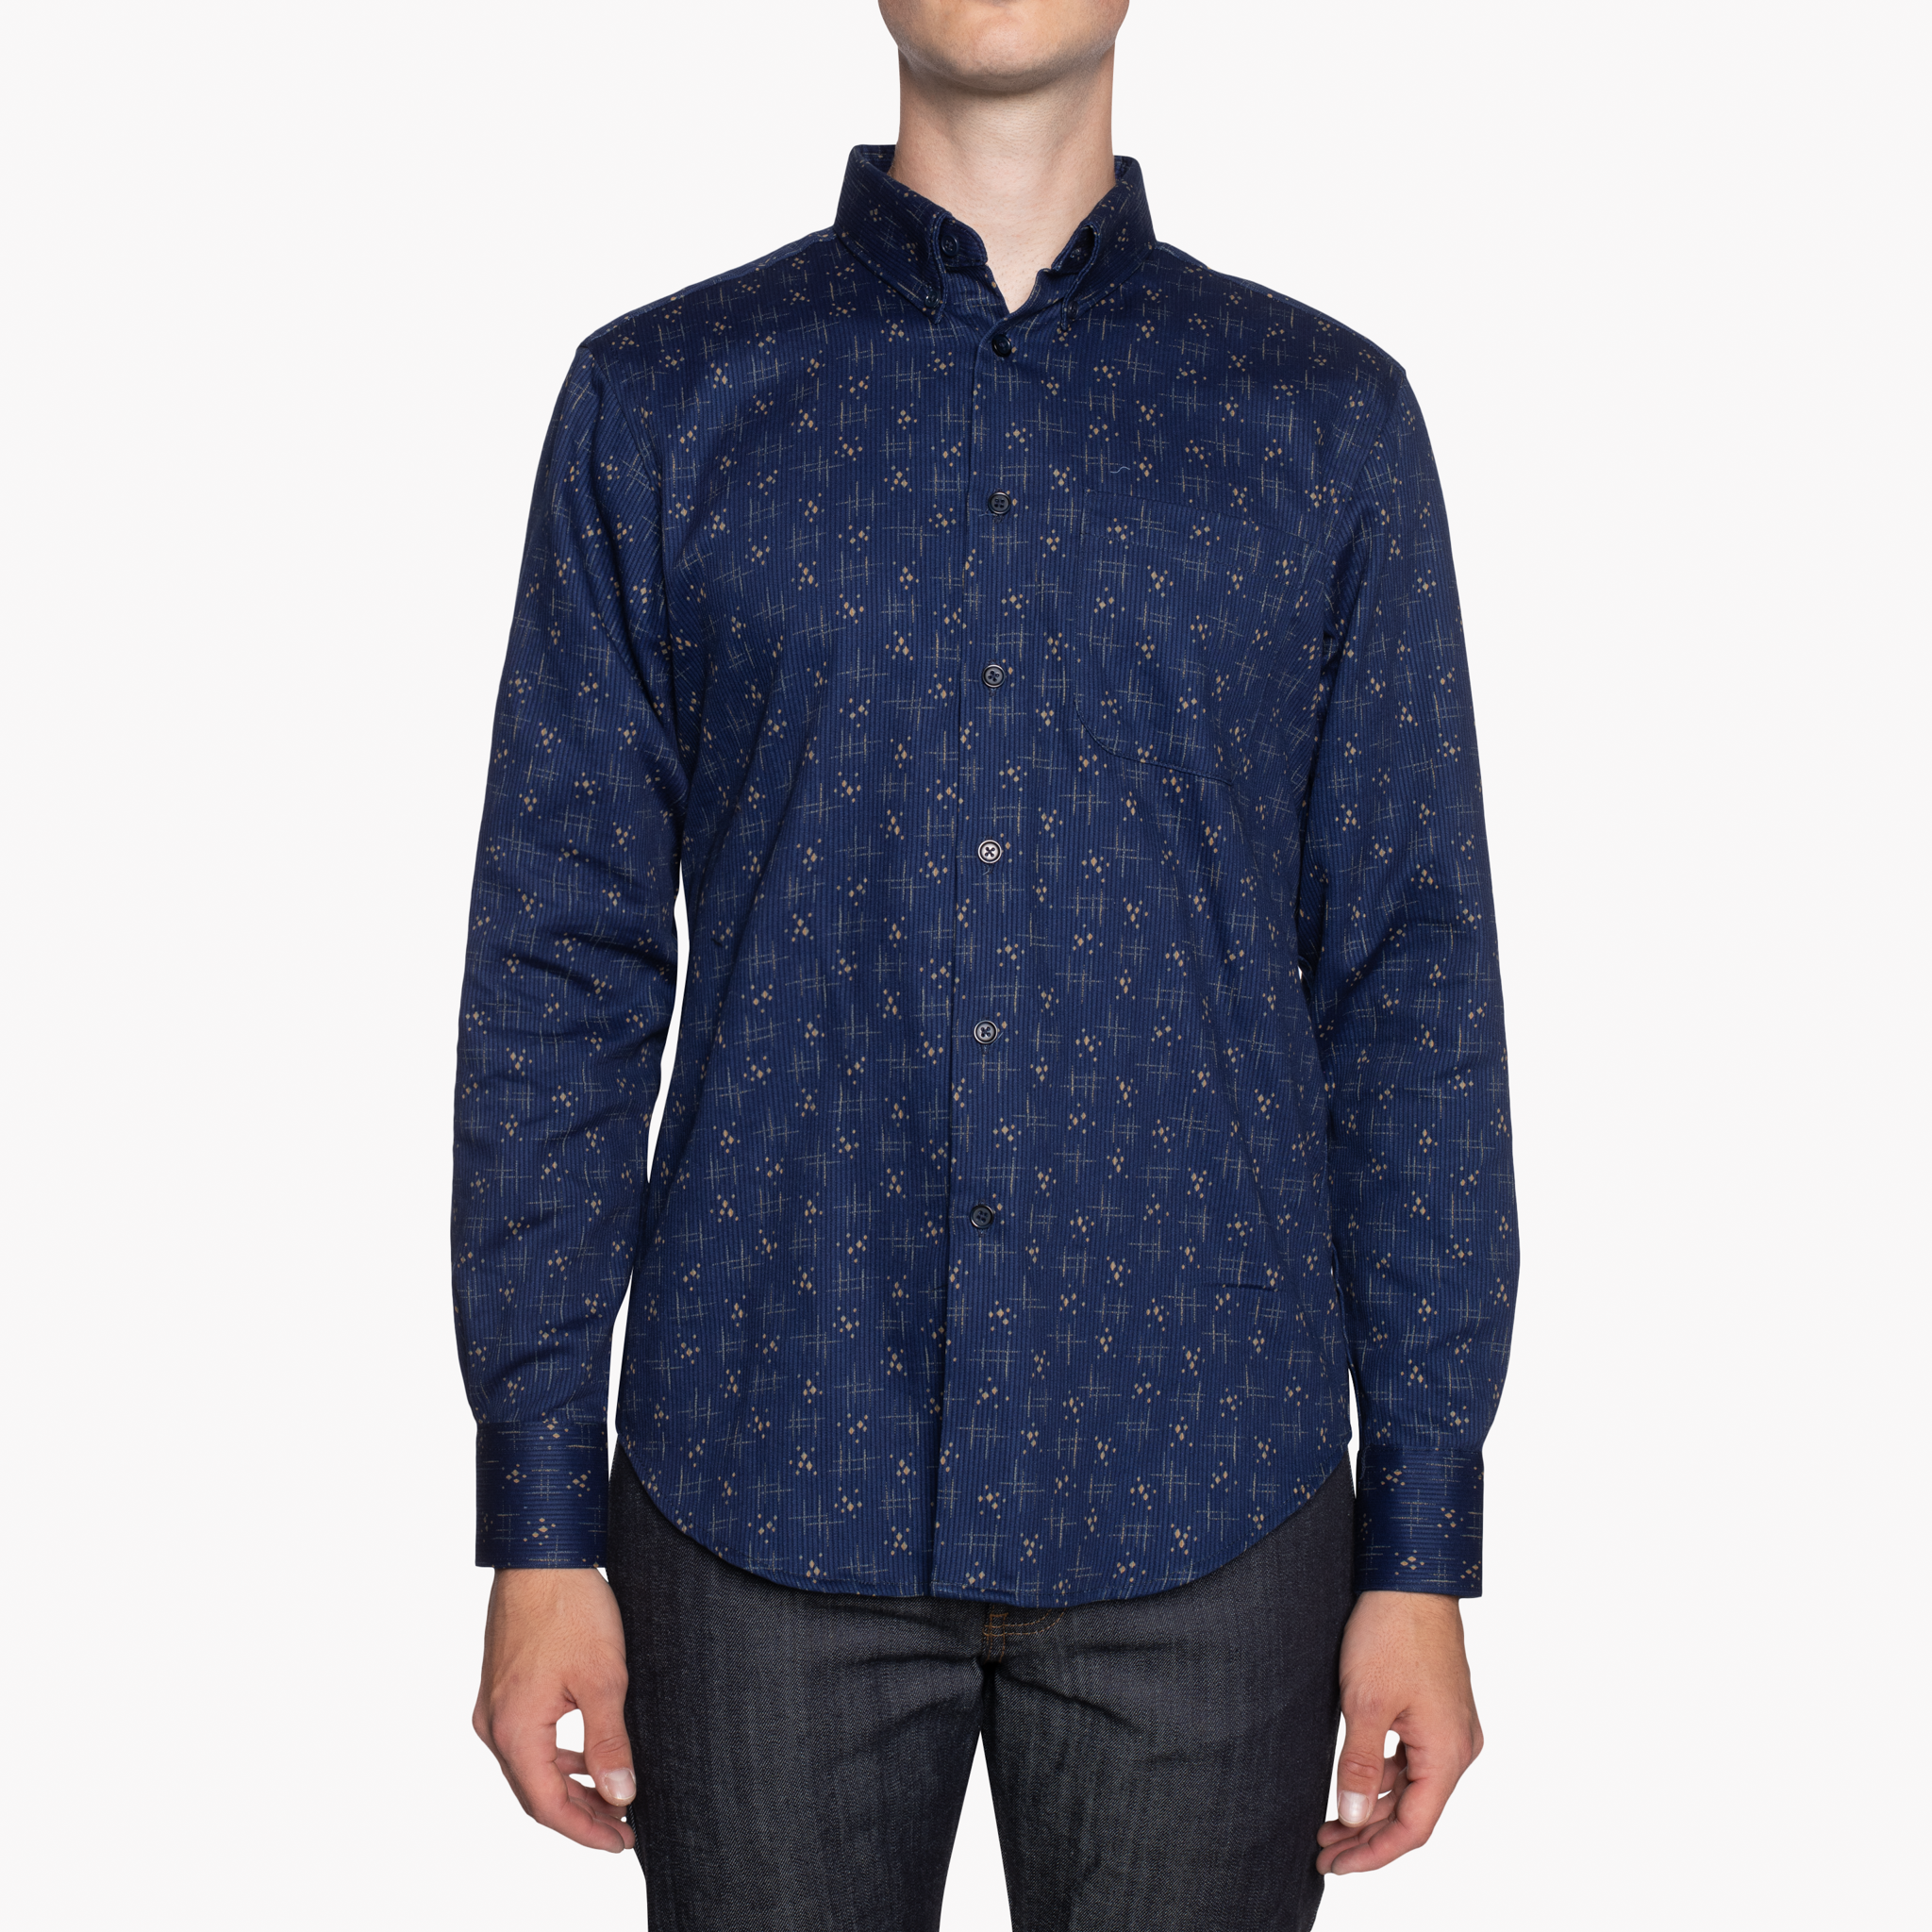  Easy Shirt - Mid-Century Pique - front 